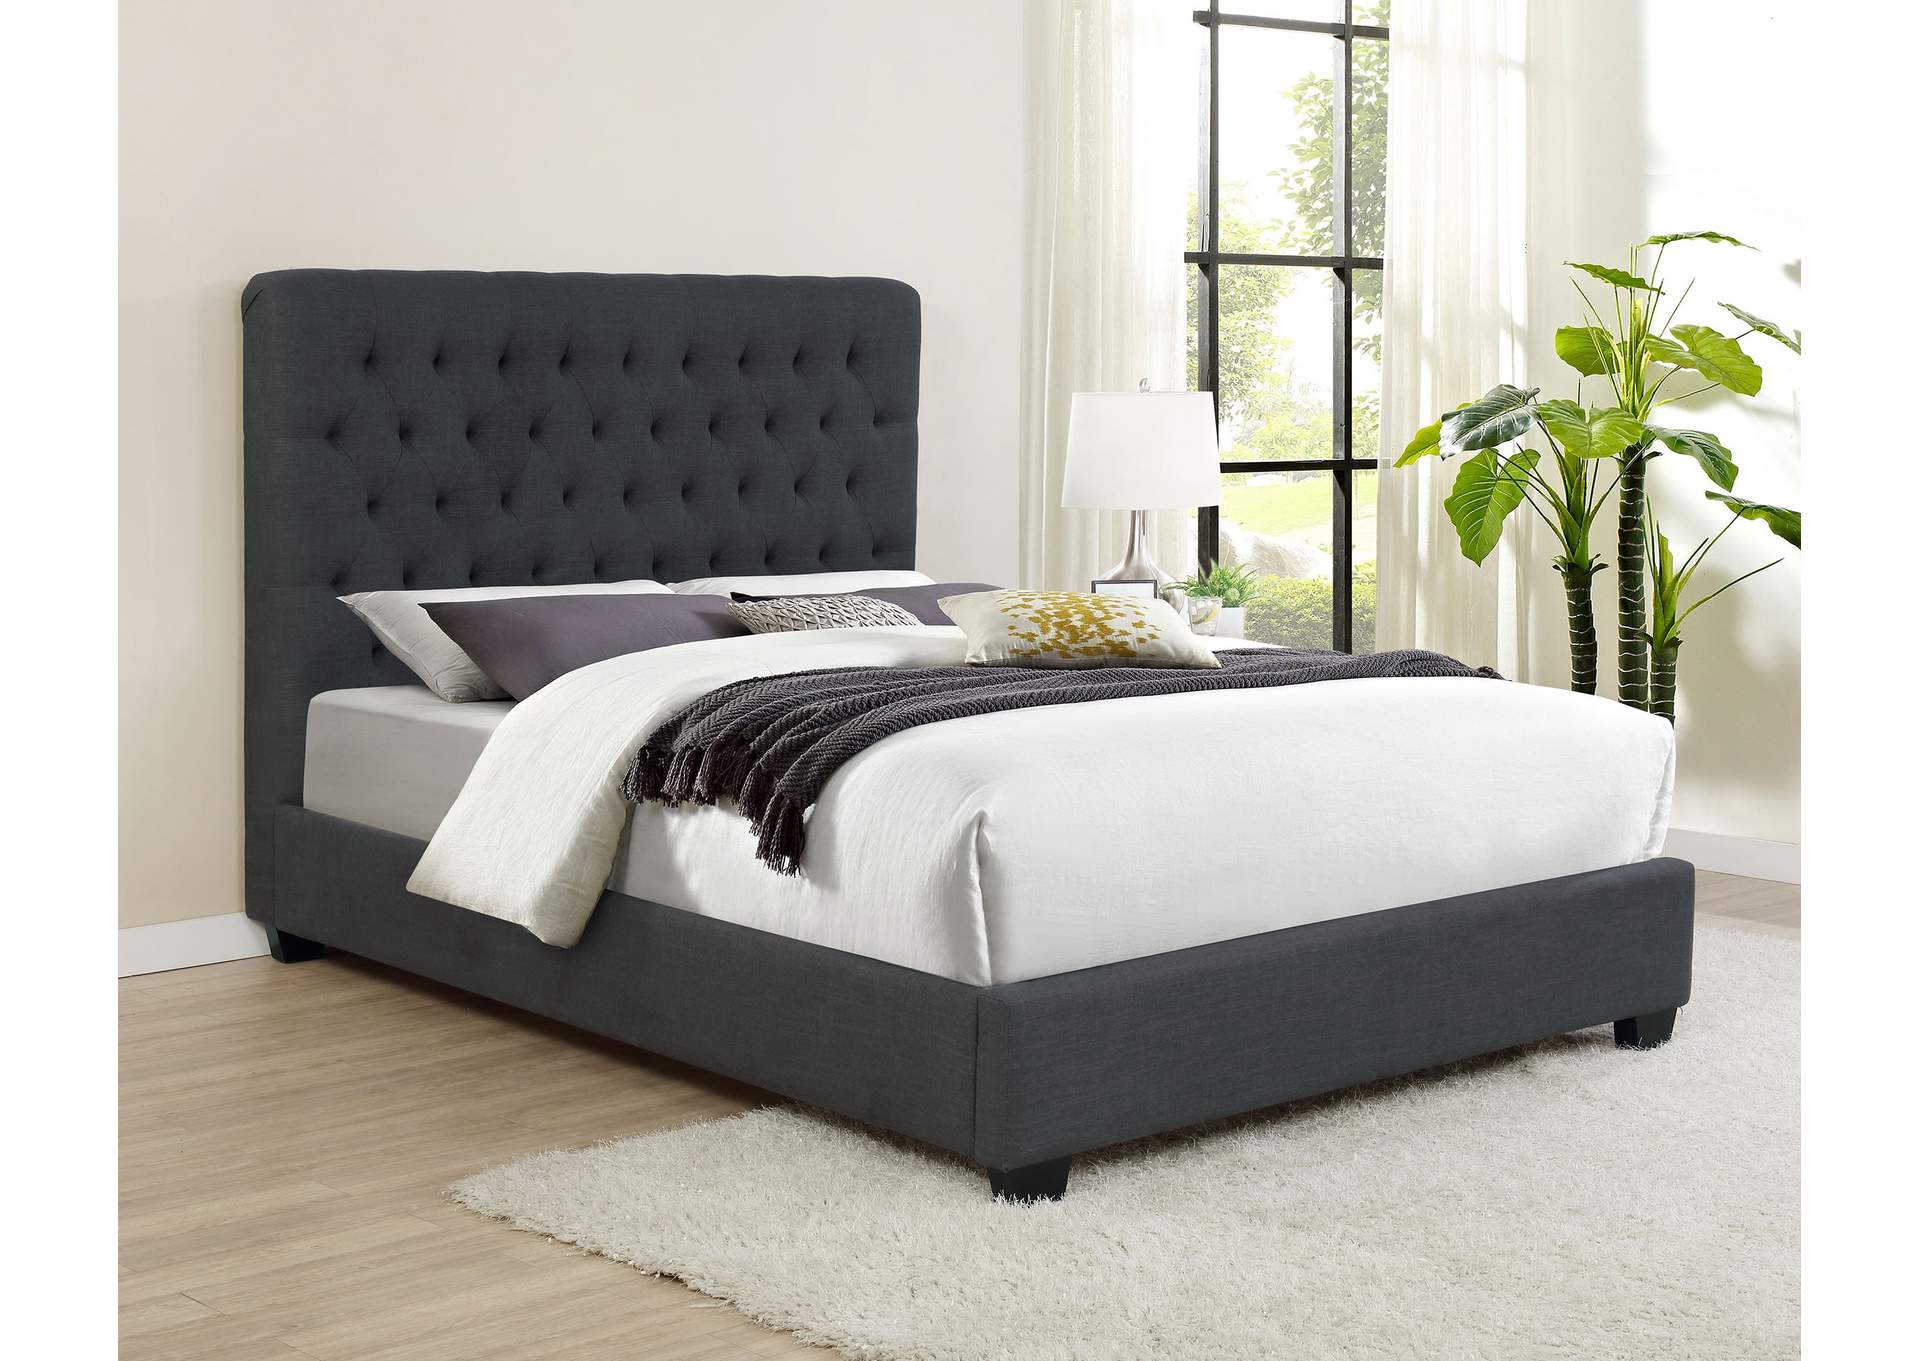 Chloe Tufted Upholstered Queen Bed Charcoal,Coaster Furniture